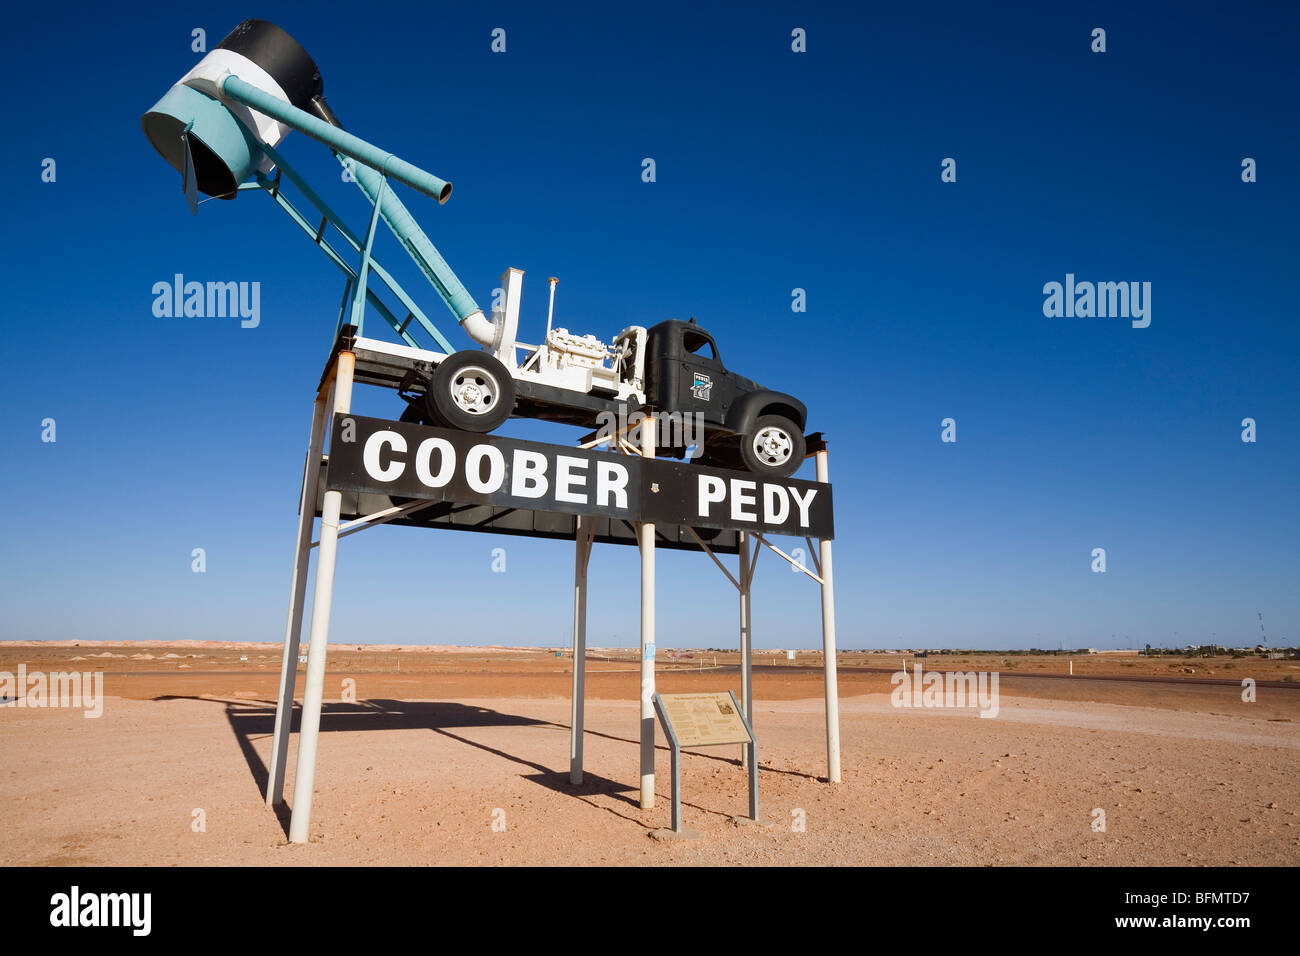 Australia, South Australia, Coober Pedy. A blower (truck used to extract dirt from opal mines) welcomes visitors to the town. Stock Photo